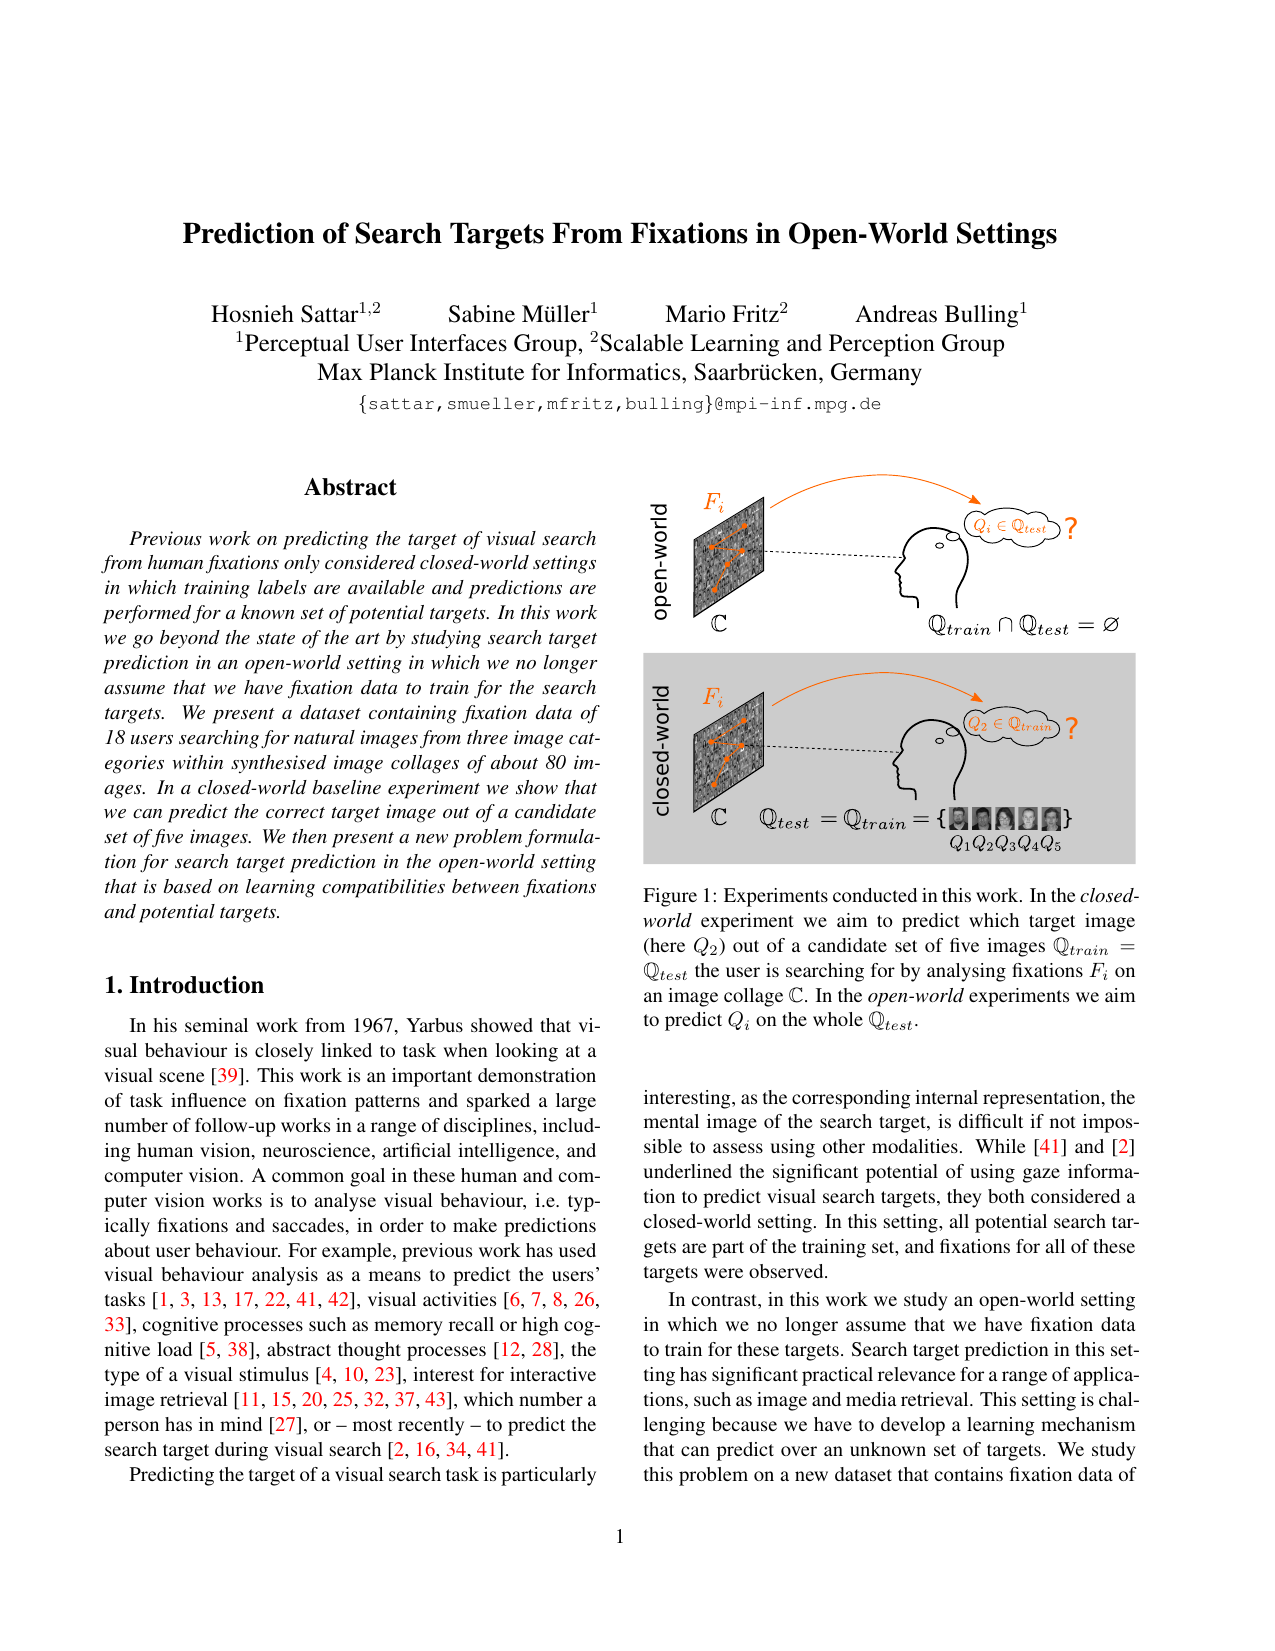 Prediction of Search Targets From Fixations in Open-world Settings